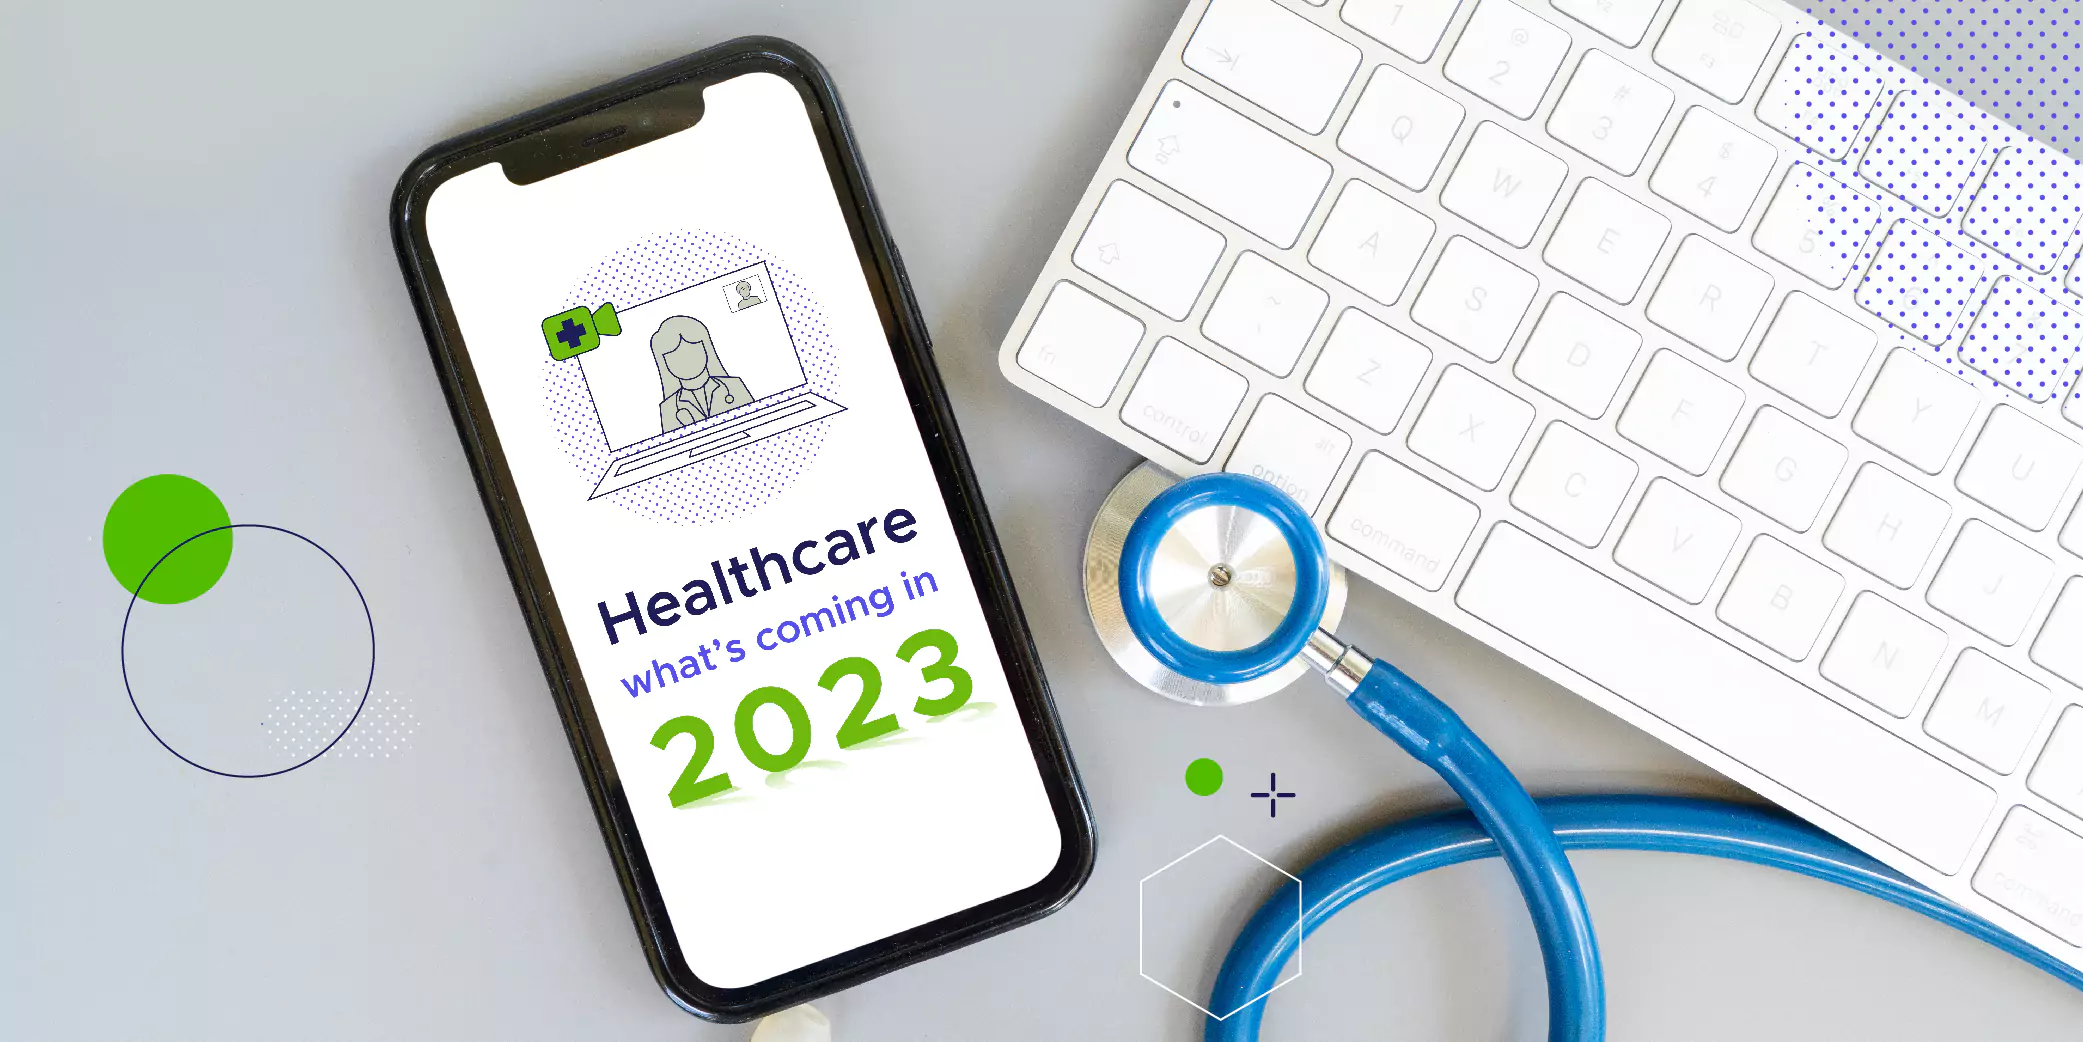 2023 is coming and so many advances in the healthcare industry